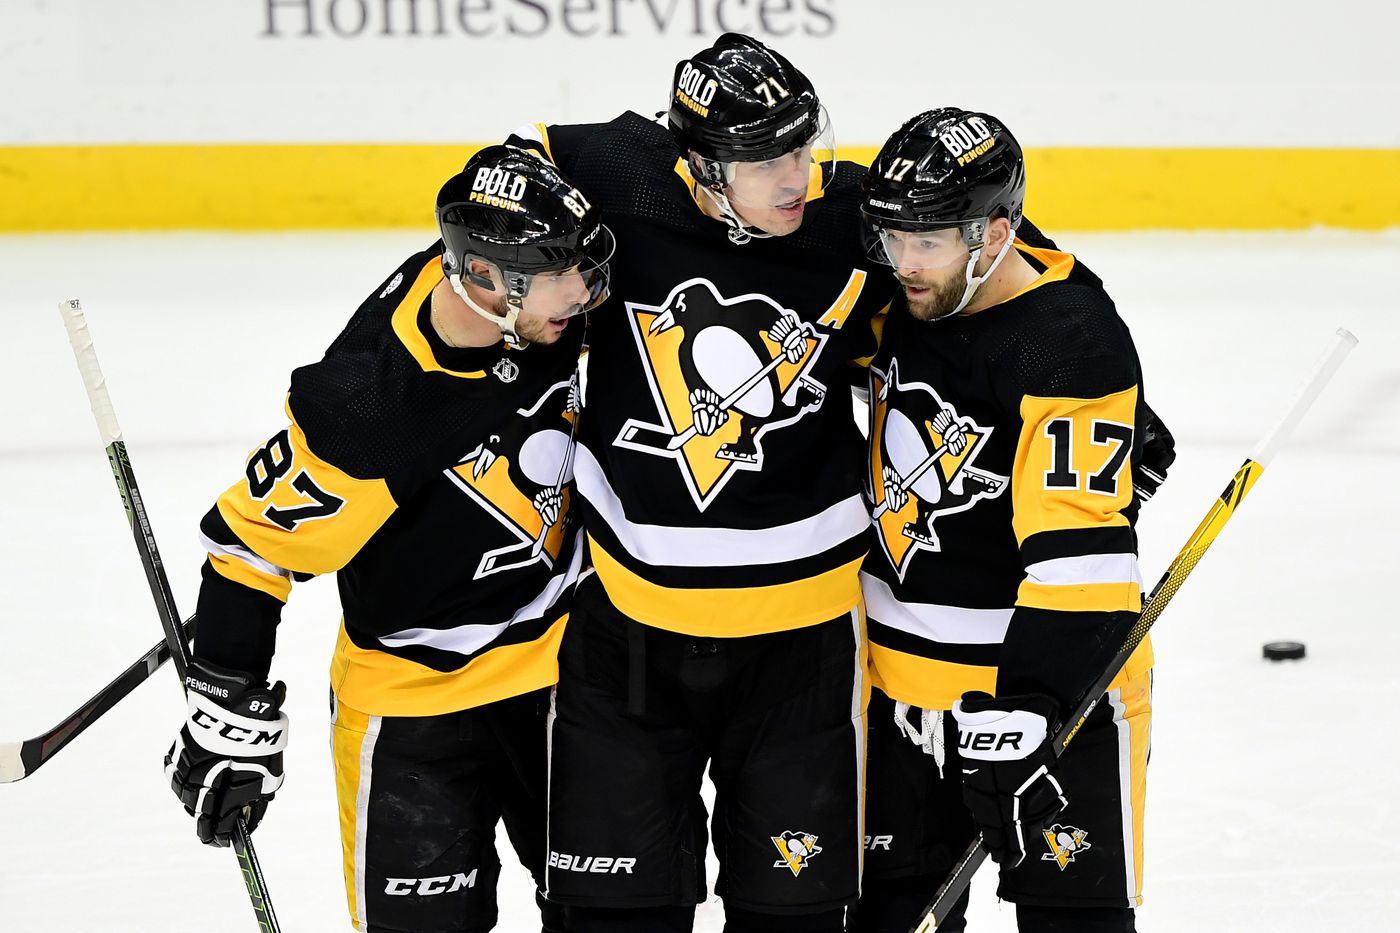 Penguins Need 3 Overtimes, but They Keep Cup Series Alive - The